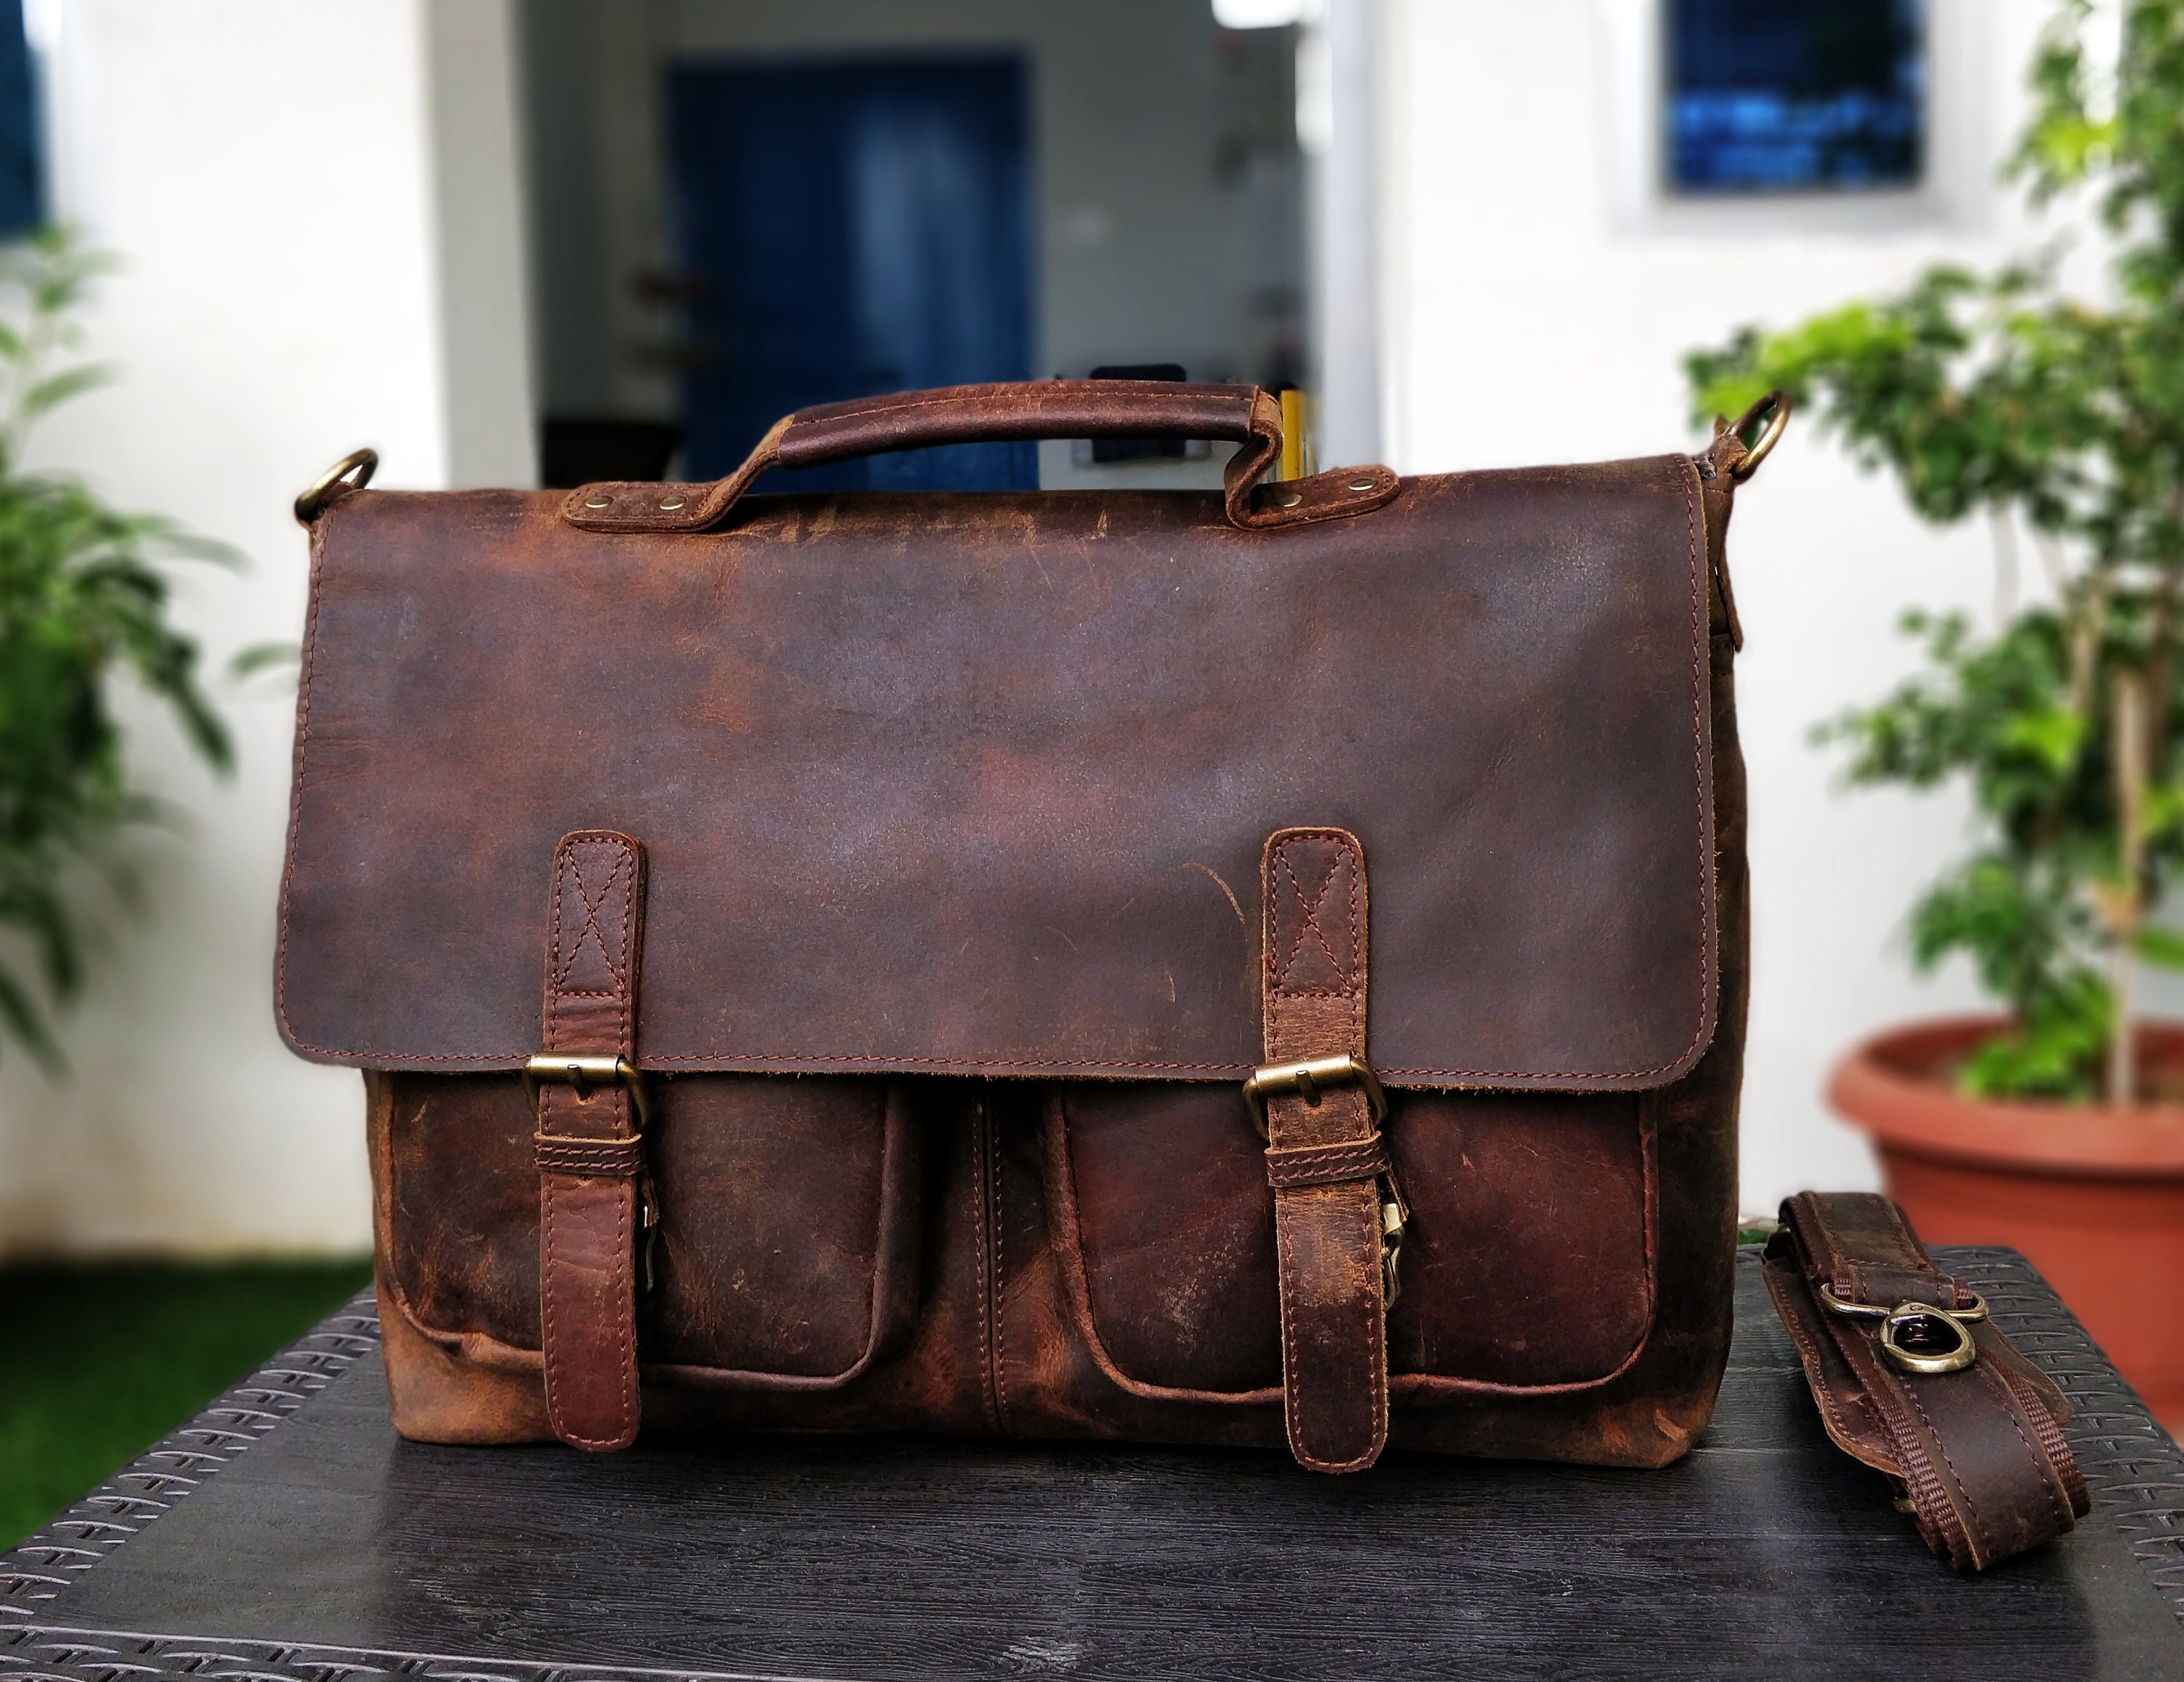 Shop Latest Stylish Bags For Men Online At Best Prices | Tata CLiQ